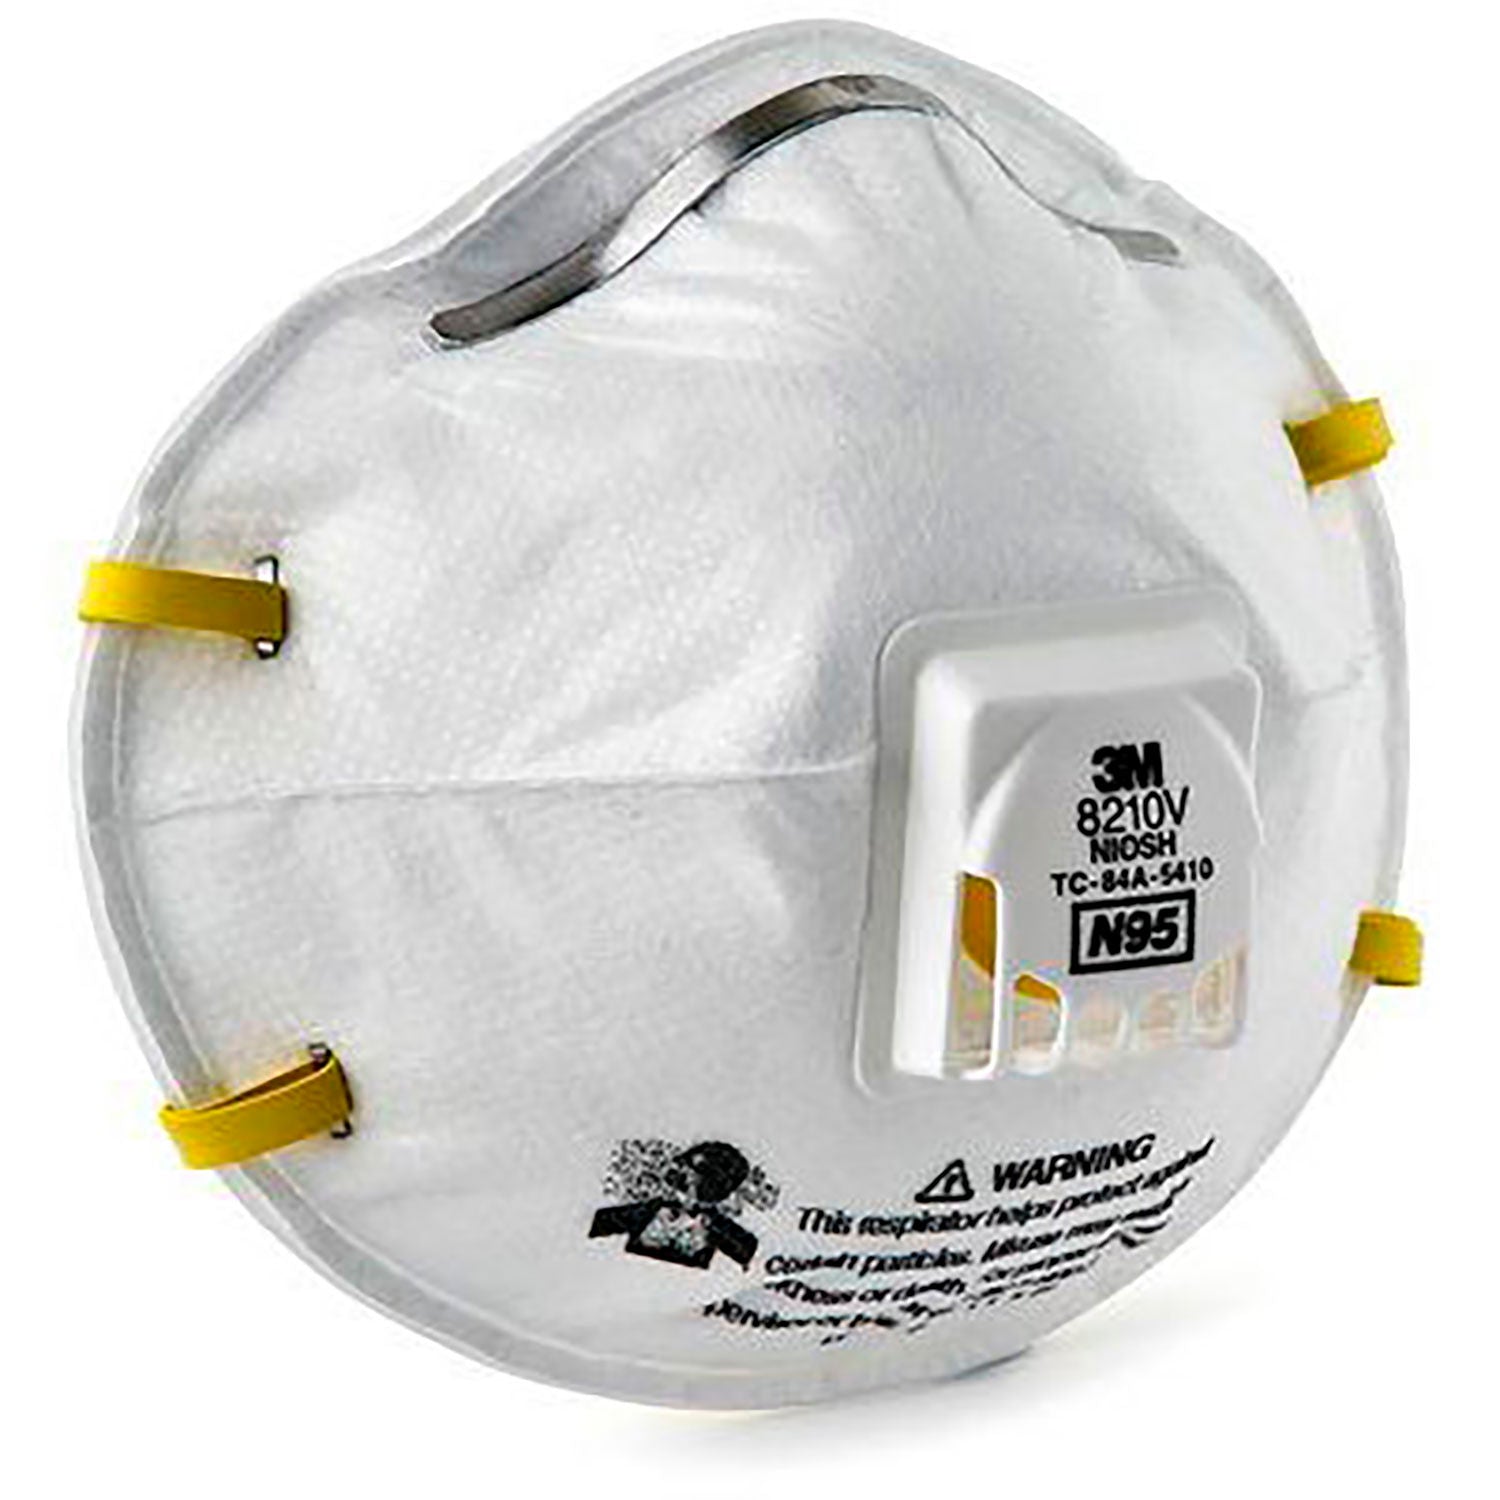 3M™ 8210V N95 Disposable Particulate Respirator, 80/Case